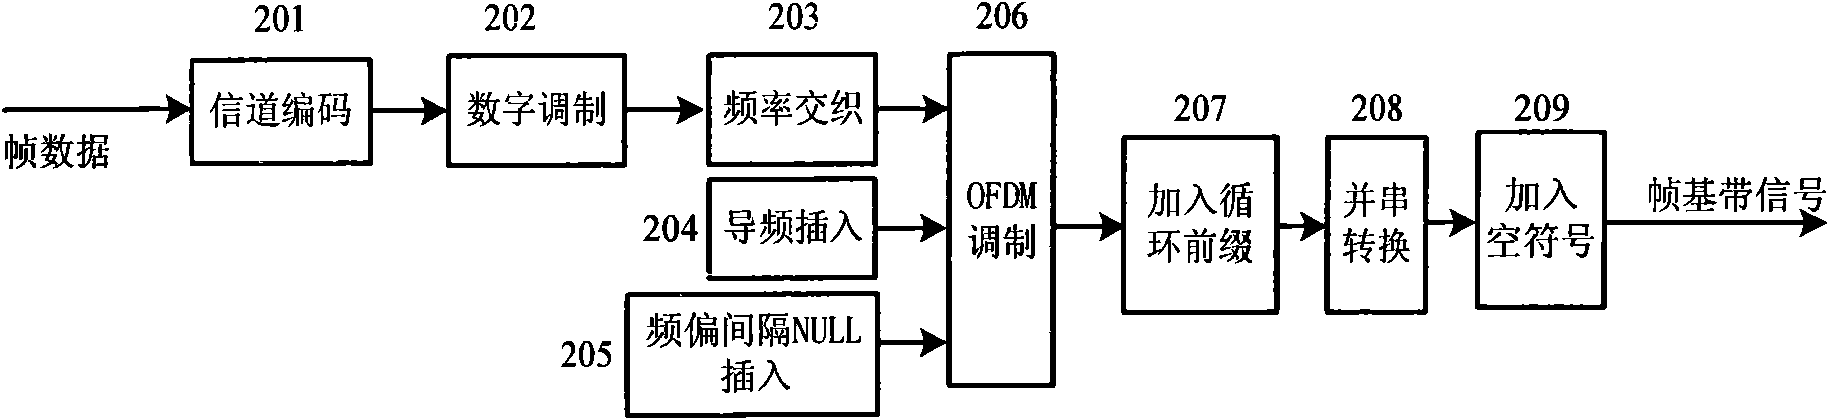 Onboard high-speed communication system based on OFDM technique